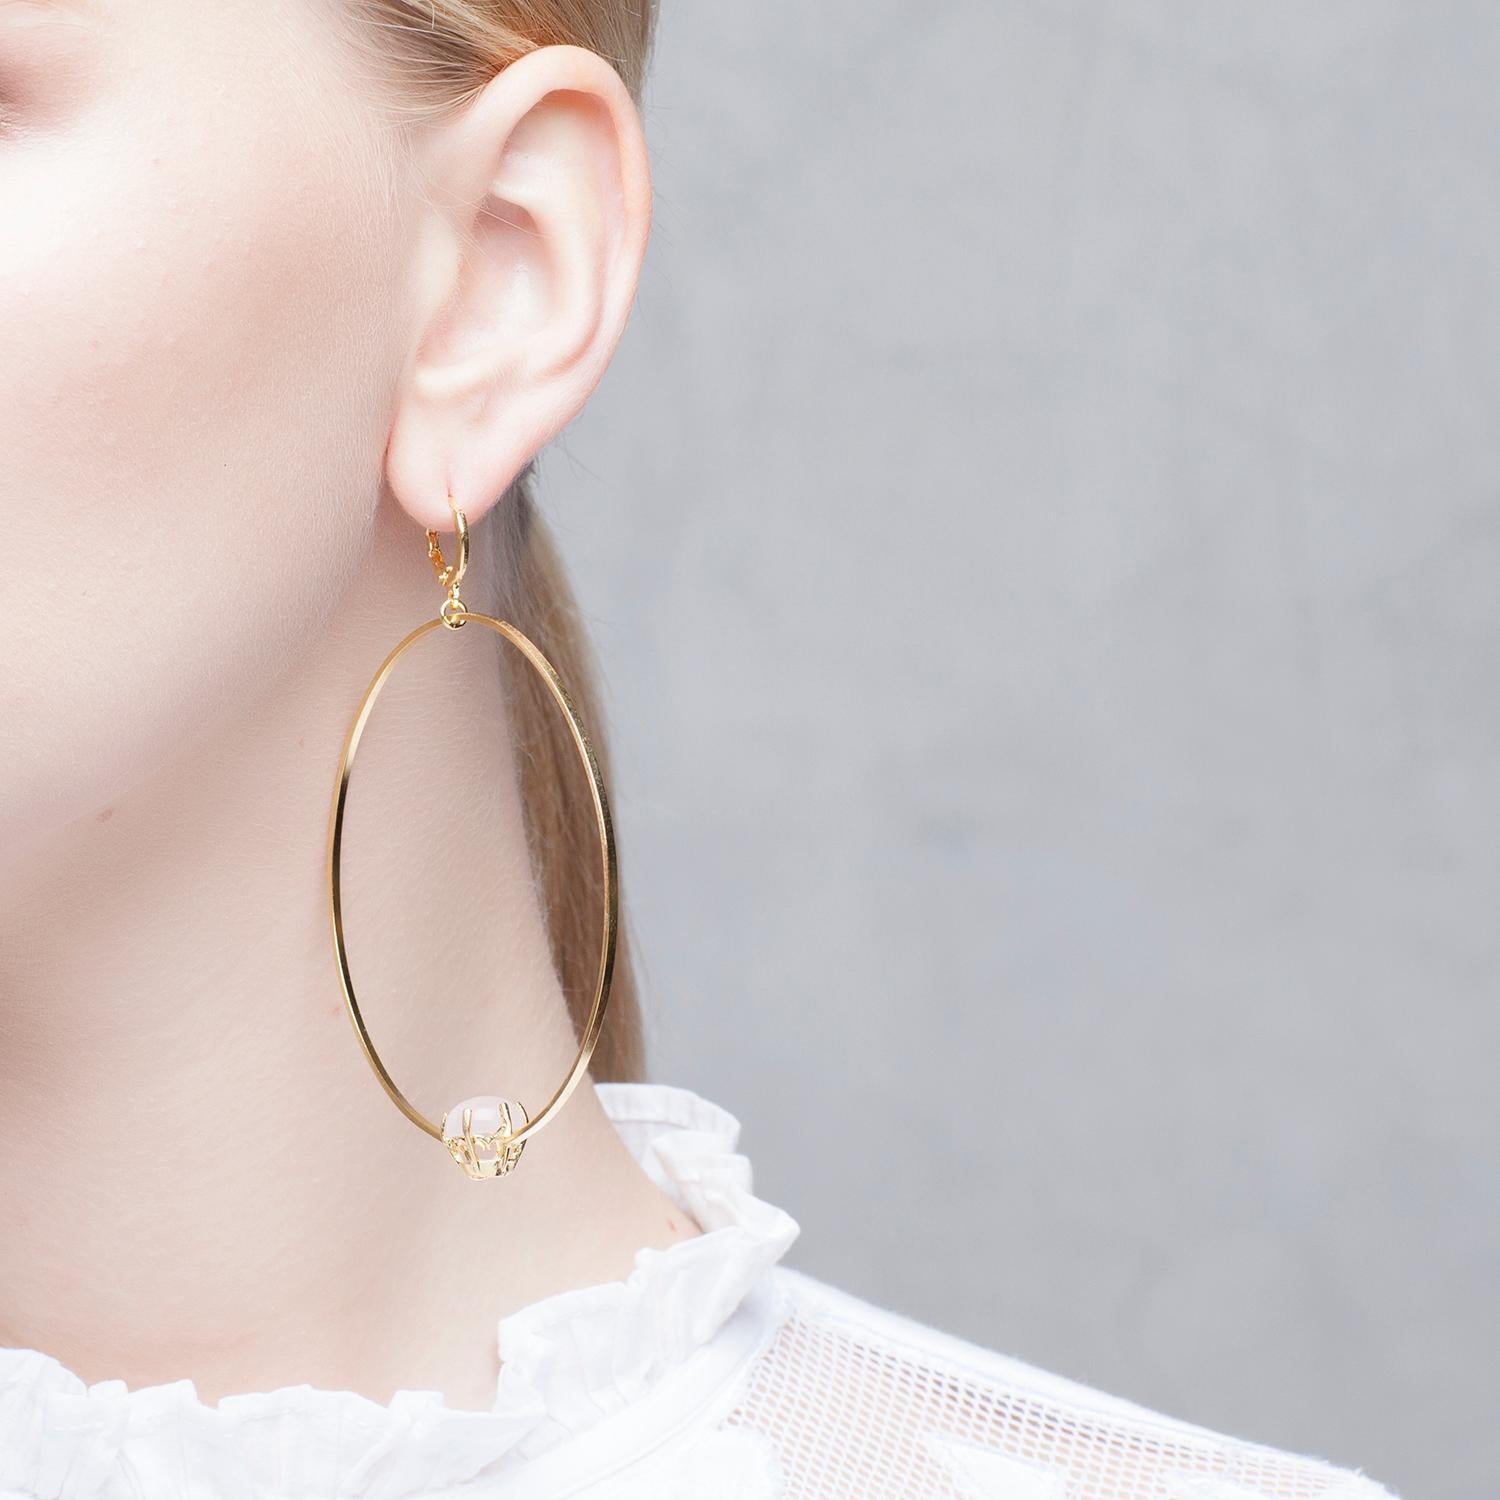 Puro Iosselliani presents its iconic creole big hoop earrings. Made in 18 Karat gold plated silver, the big hoops float effortlessly by a lever back vintage hook. A reversed rose quartz round stone embellishes the hoop for extra shimmering. 6,5 cm